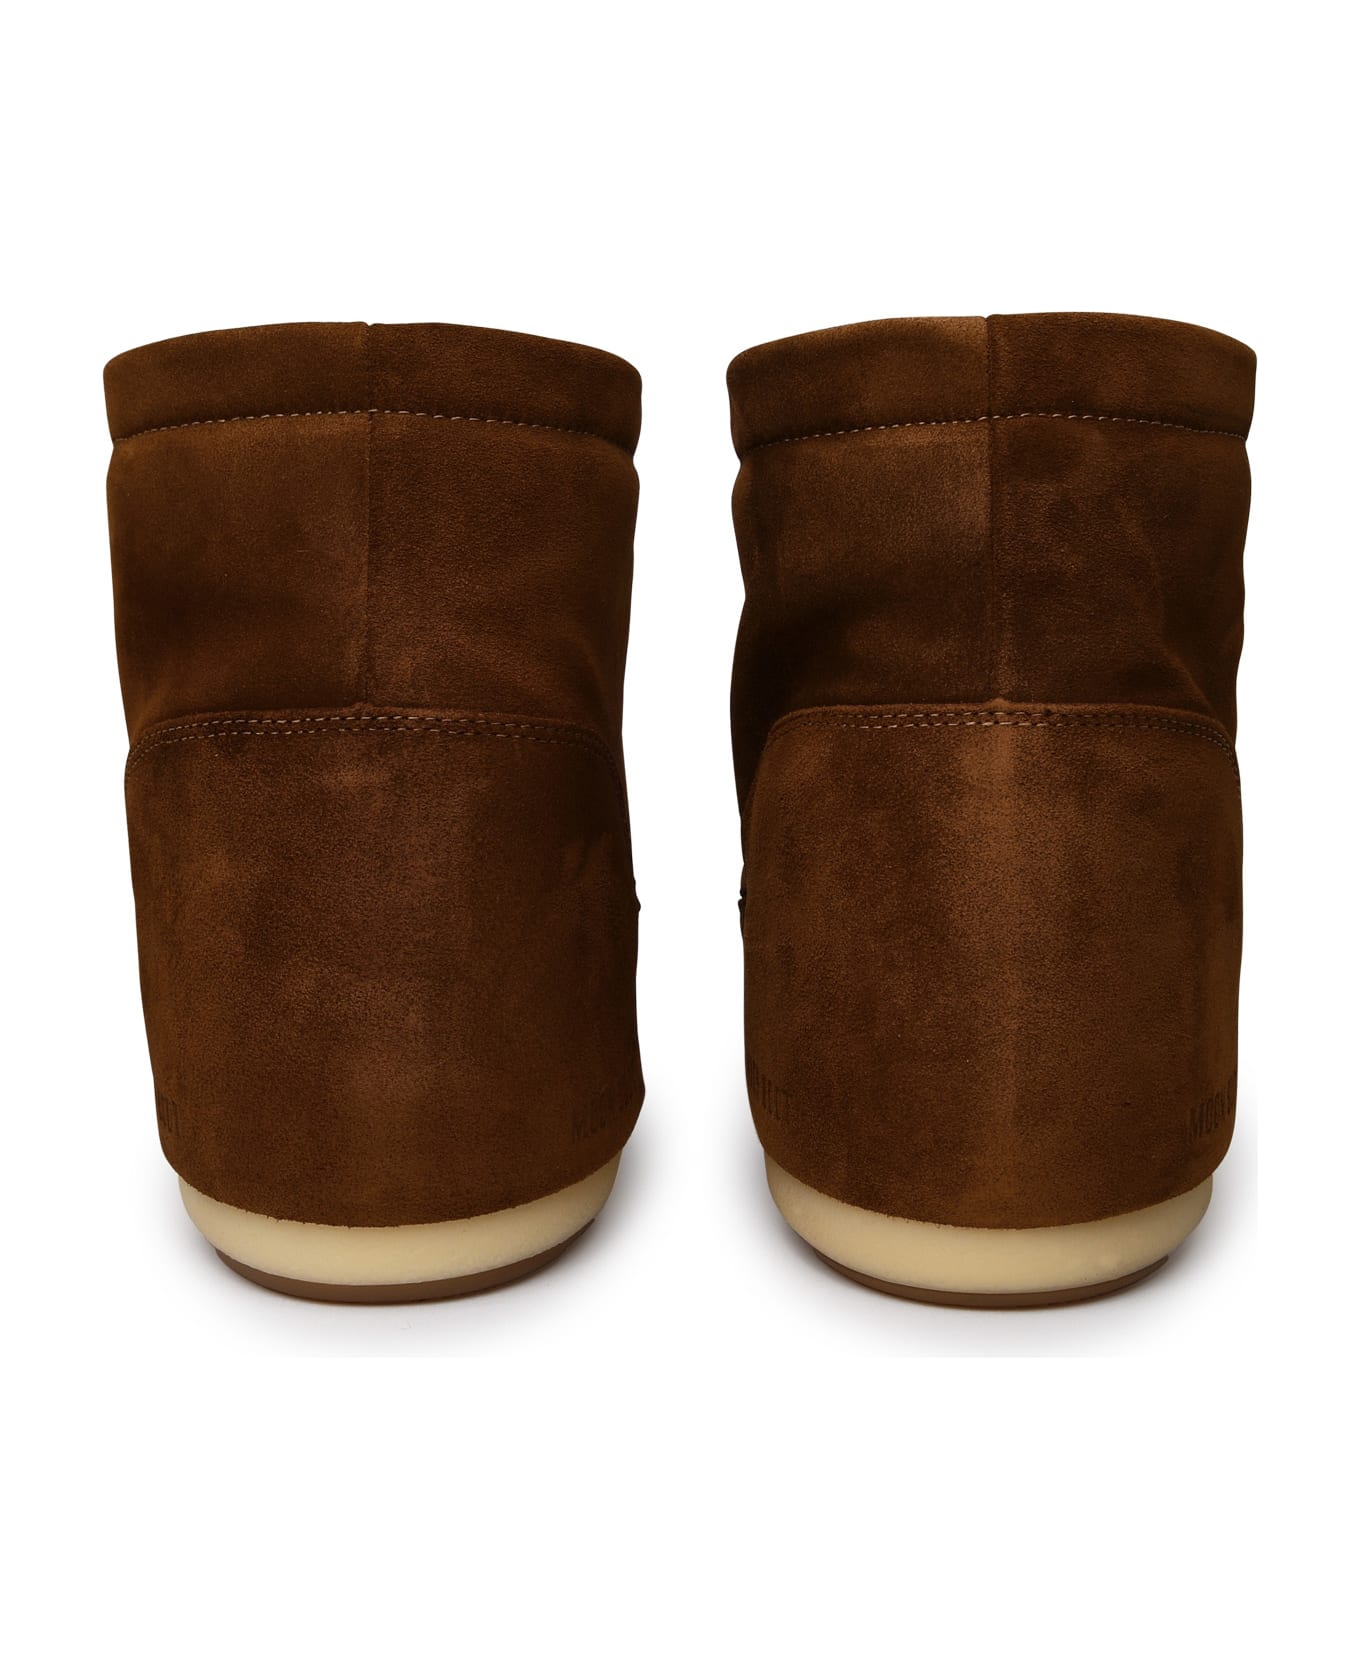 Moon Boot 'low-top Icon' Hazelnut Suede Boots - Brown